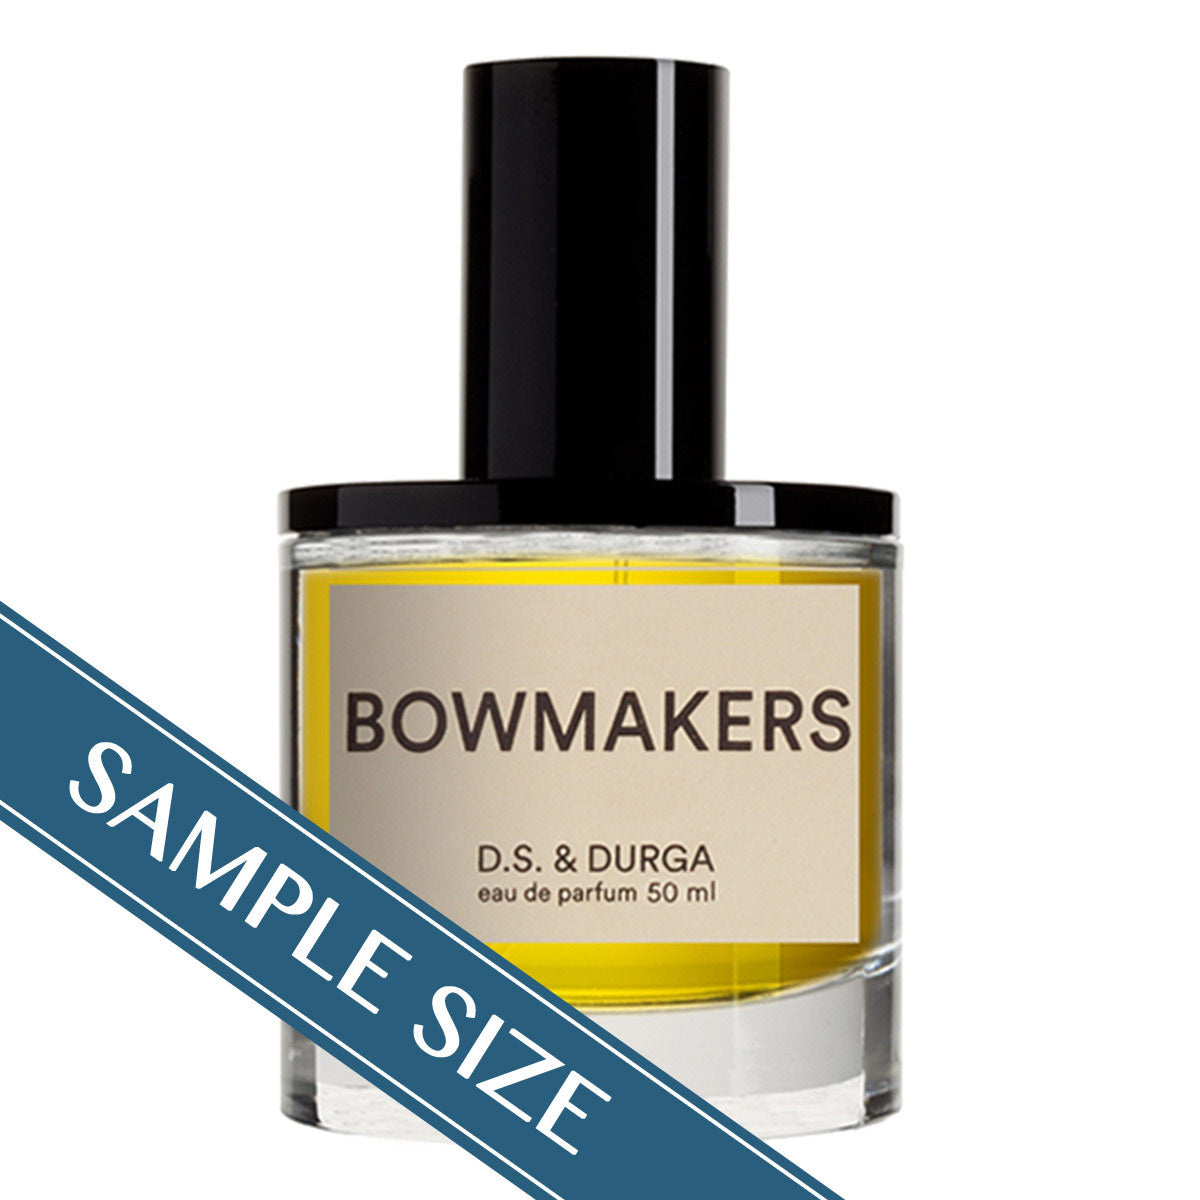 Primary image of Sample - Bowmakers EDP